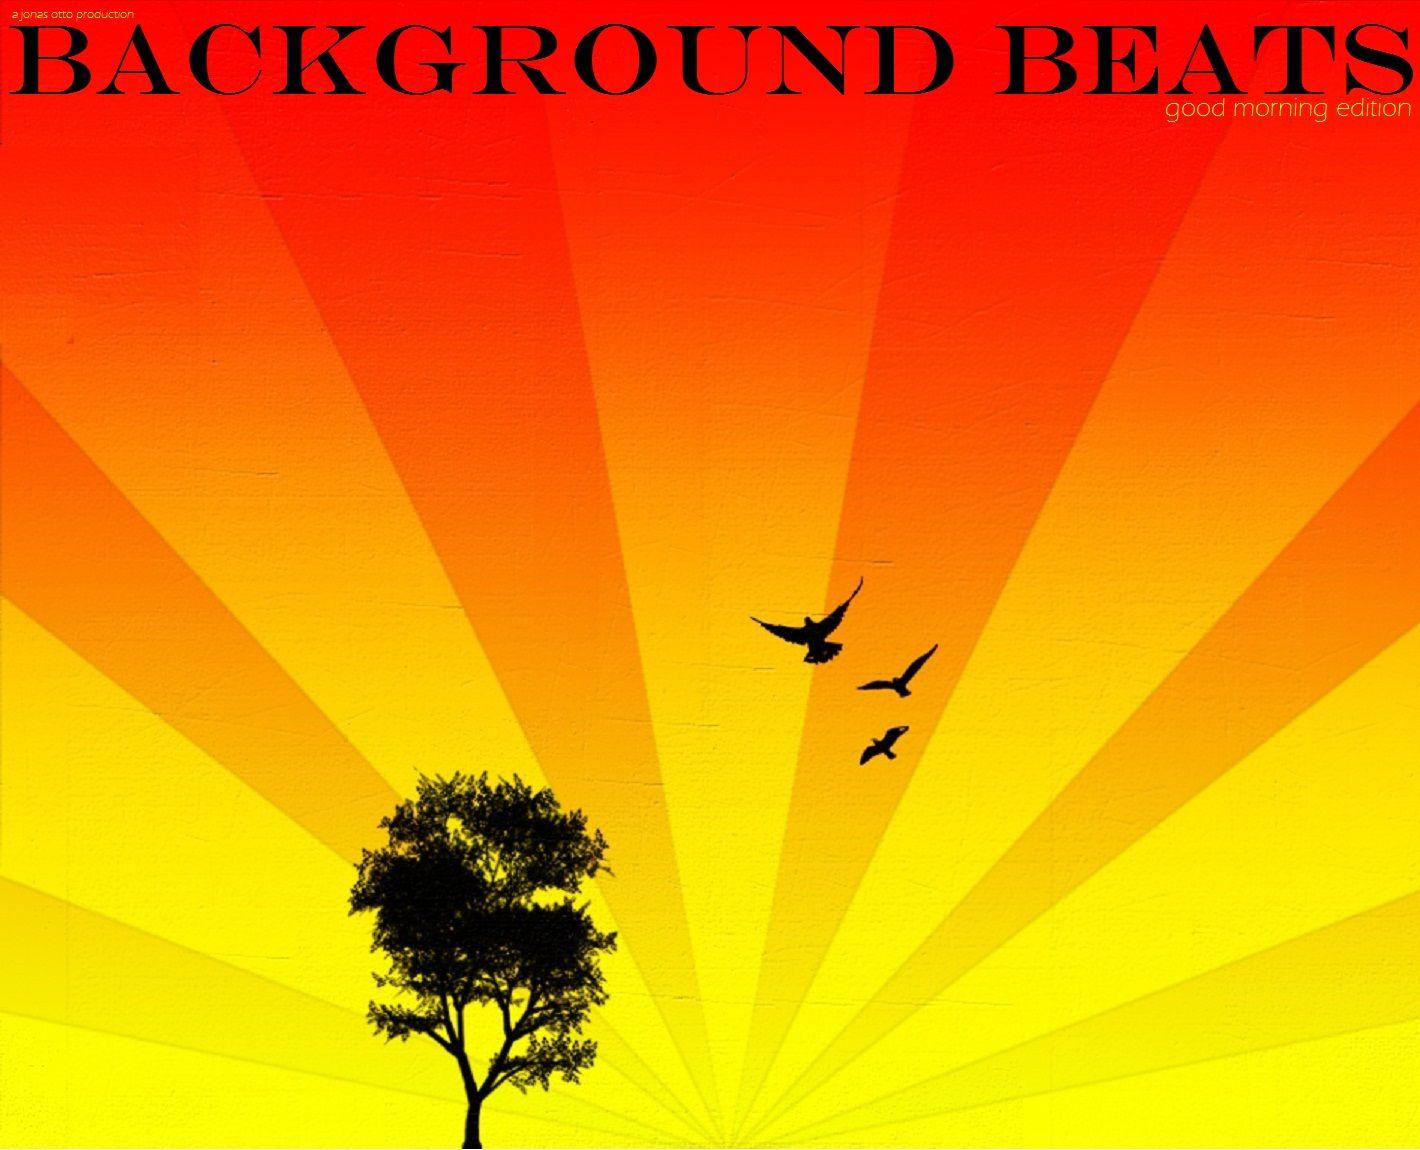 Coventry Music: Background Beats Morning Edition